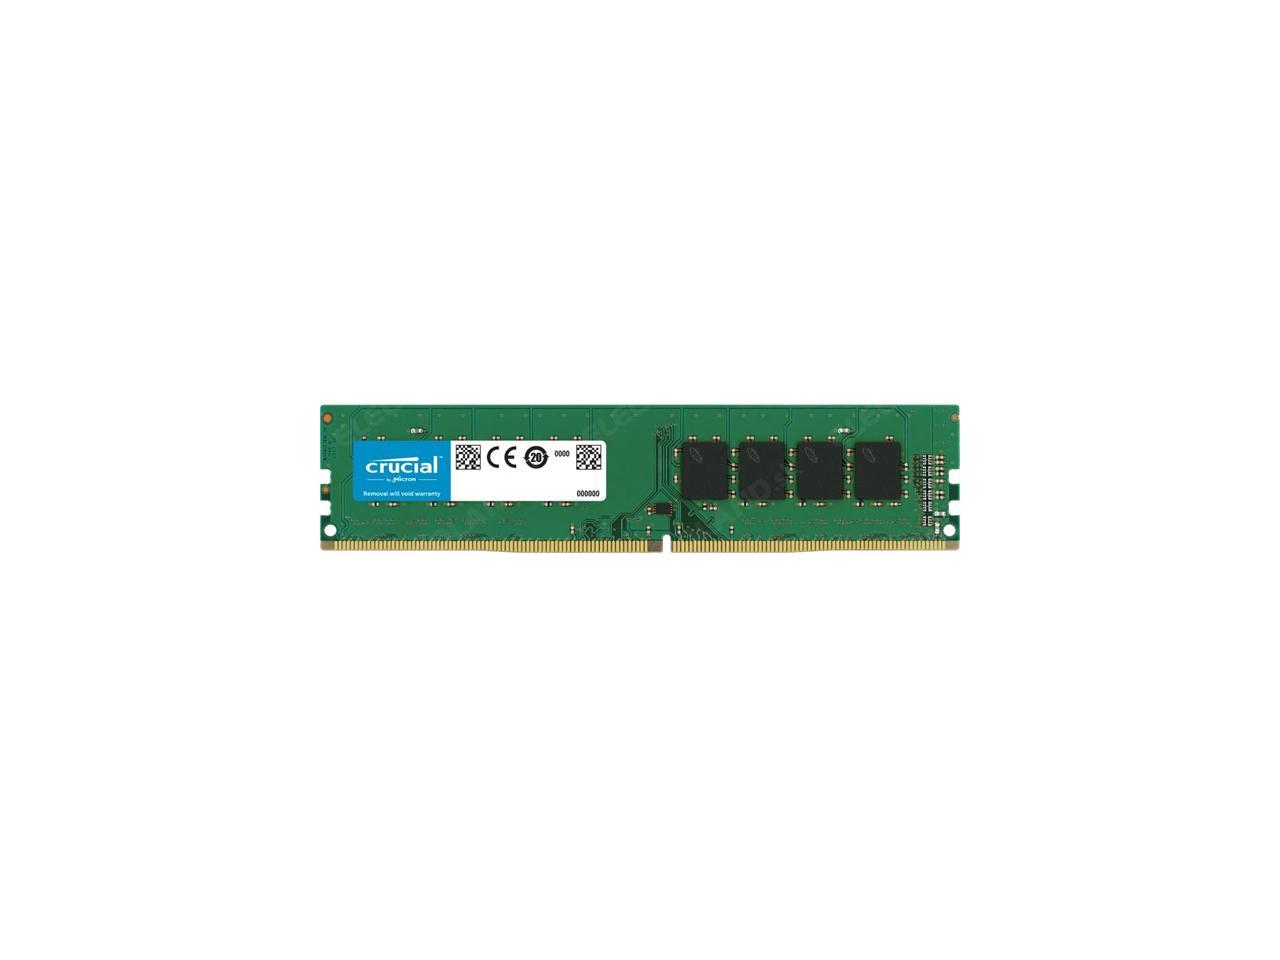 Crucial 32GB Single DDR4 2666 MT/s CL19 DIMM 288-Pin Memory - CT32G4DFD8266